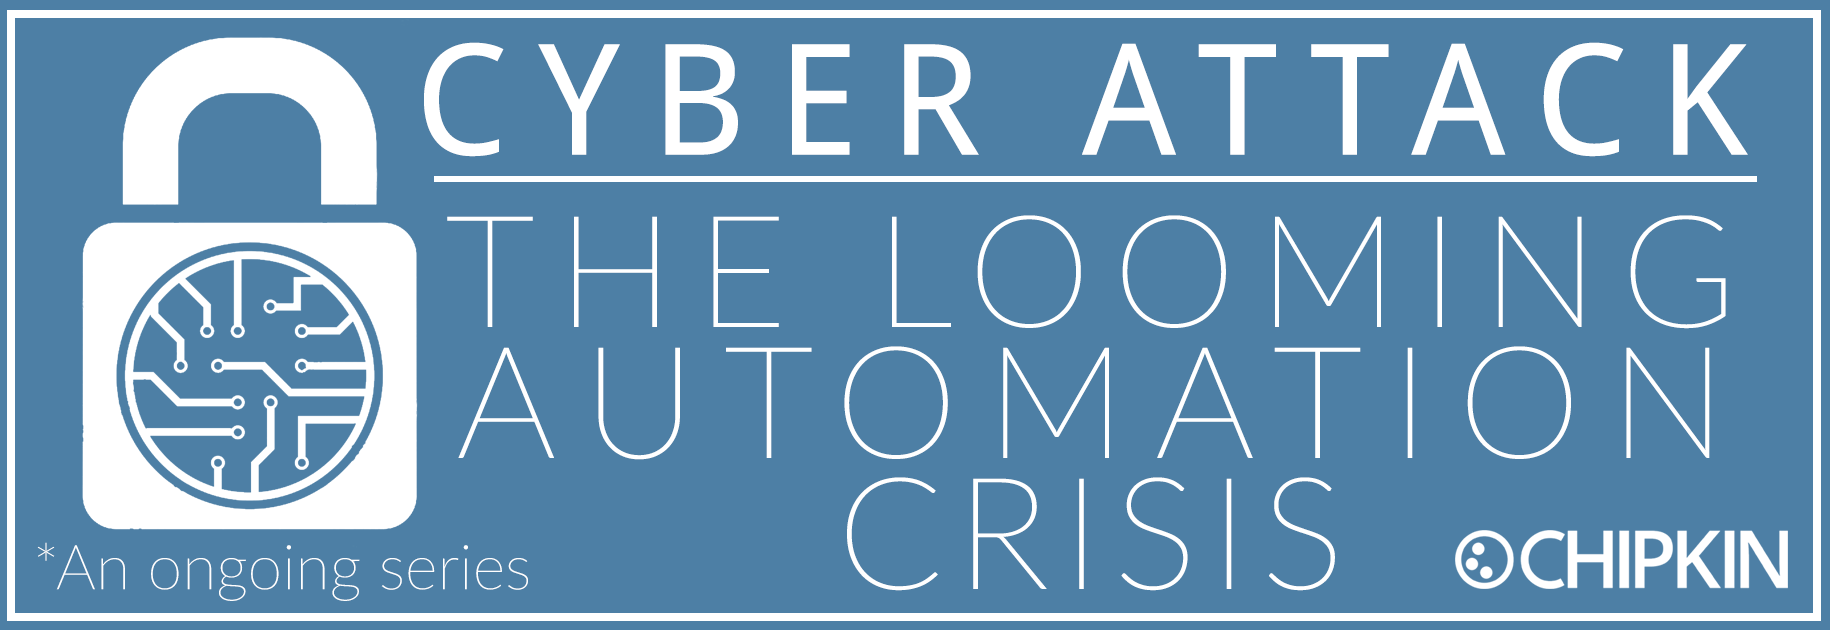 https://cdn.chipkin.com/assets/uploads/2019/Jan/Newsletter - Cyber Attack The Looming Automation Crisis_07-14-20-00.png